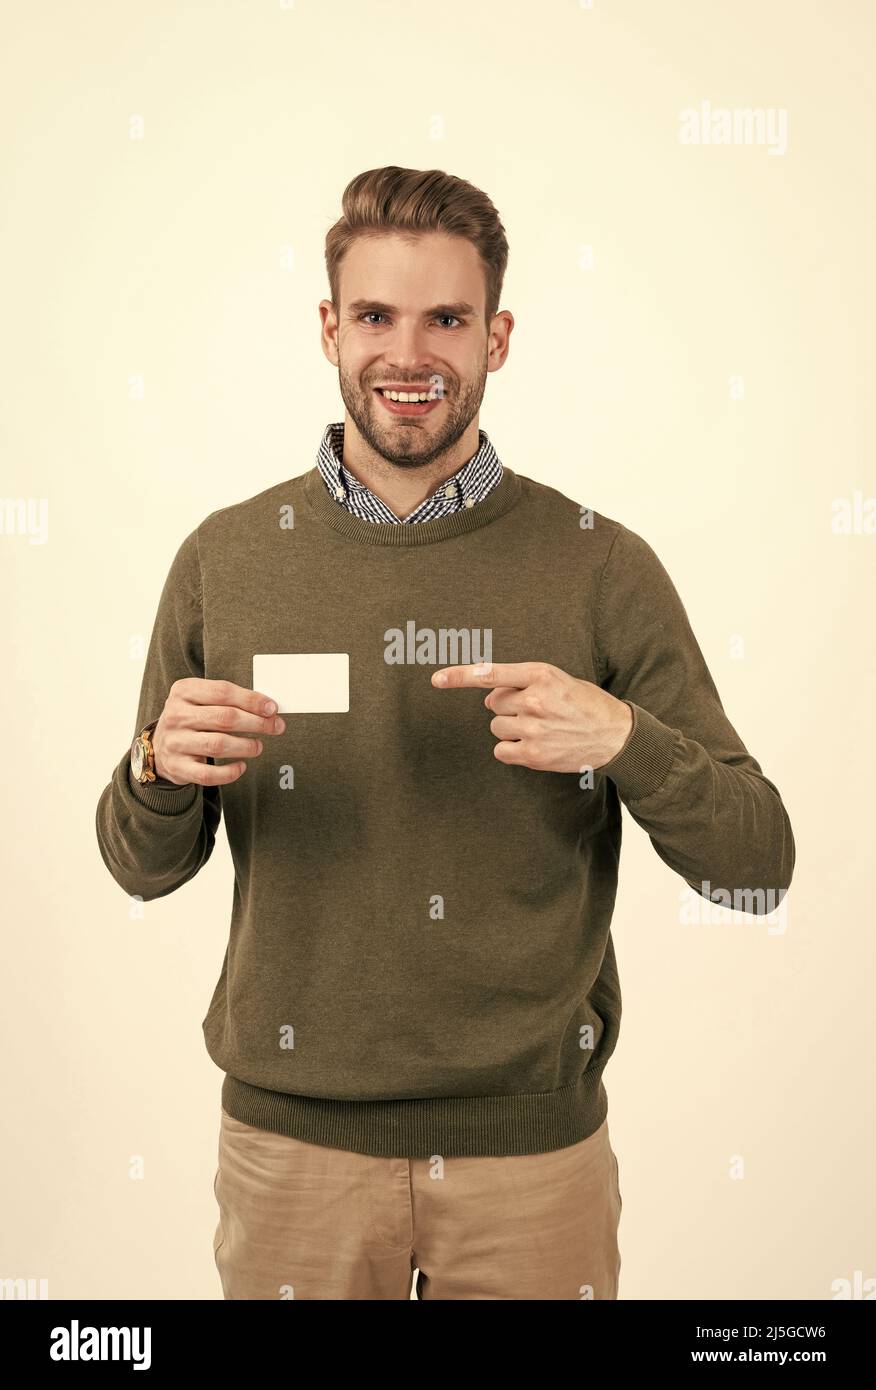 guy show driver license. man with credit or debit card, copy space. businessman show business card. Stock Photo